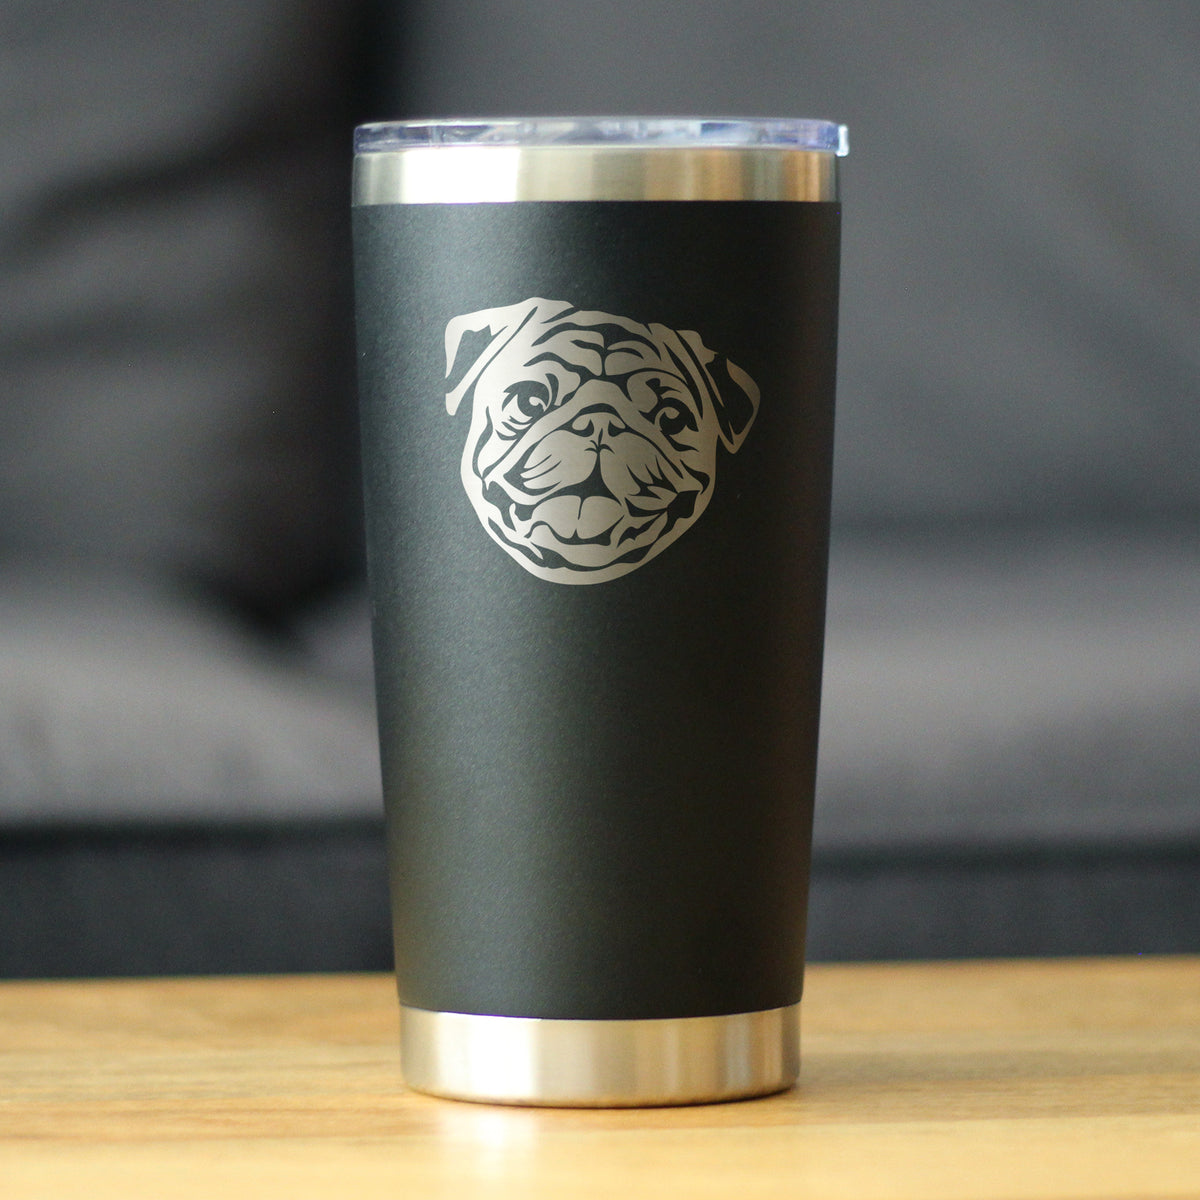 Pug - Insulated Coffee Tumbler Cup with Sliding Lid - Stainless Steel Insulated Mug - Cute Pug Themed Gift for Men and Women